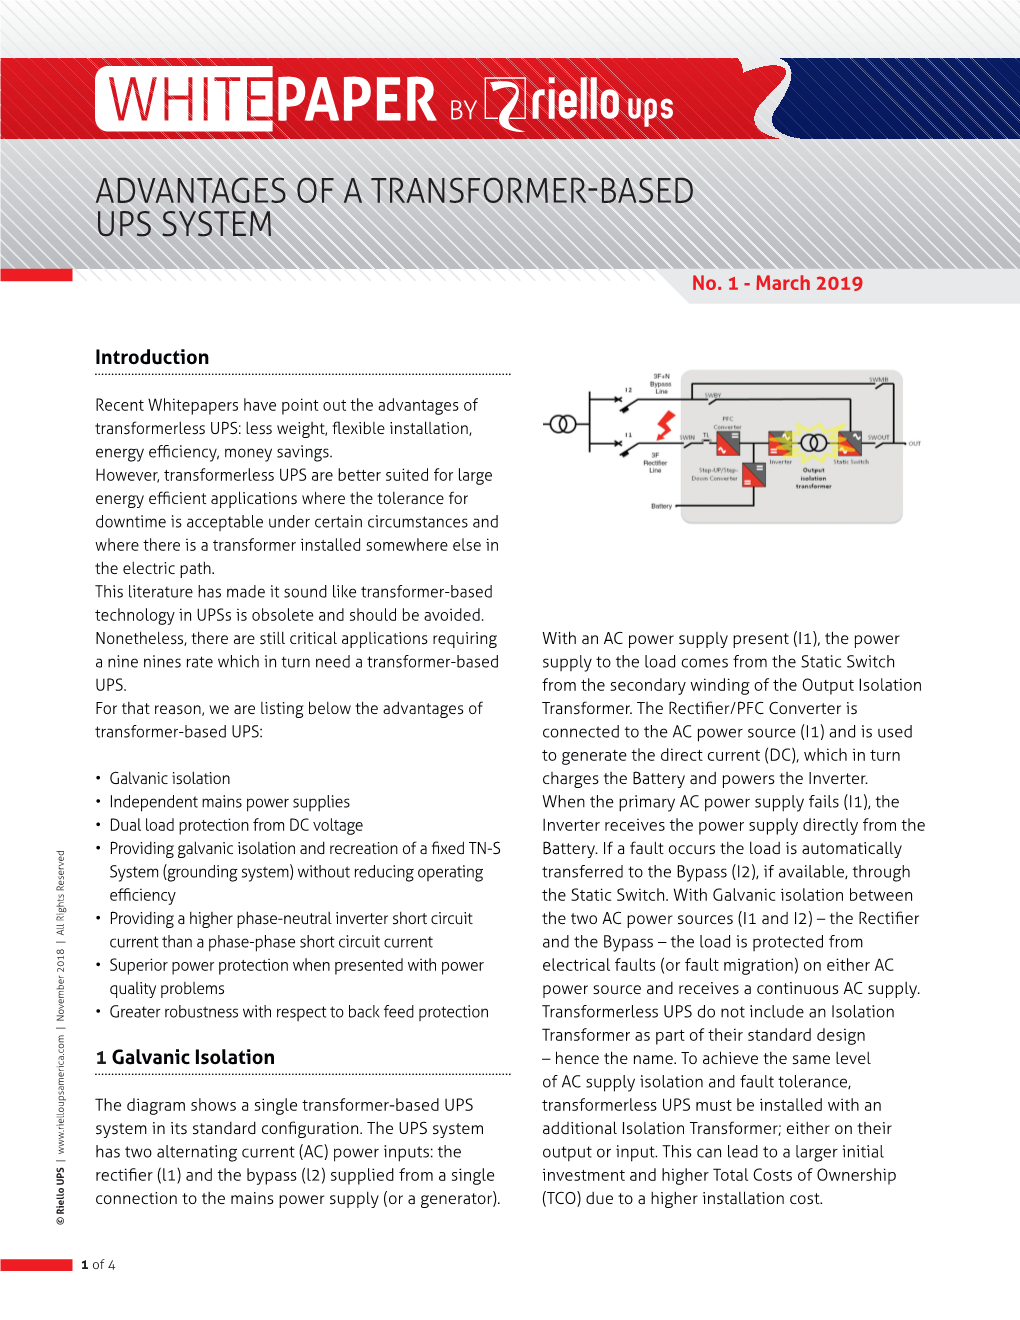 Advantages of a Transformer-Based UPS White Paper.Indd